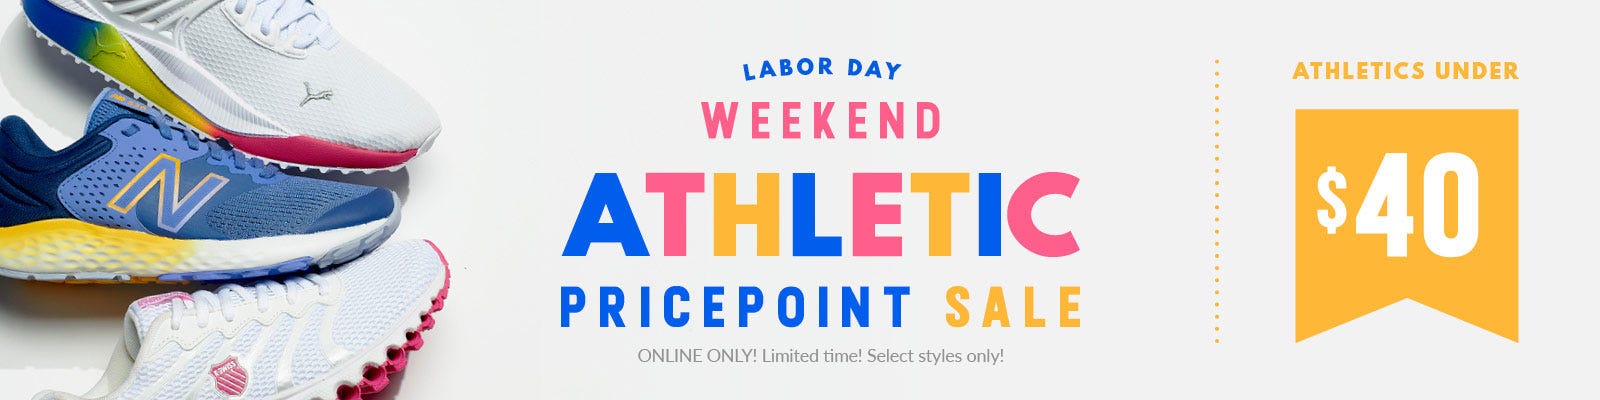 Labor Day Weekend Athletic Price Point Sale!